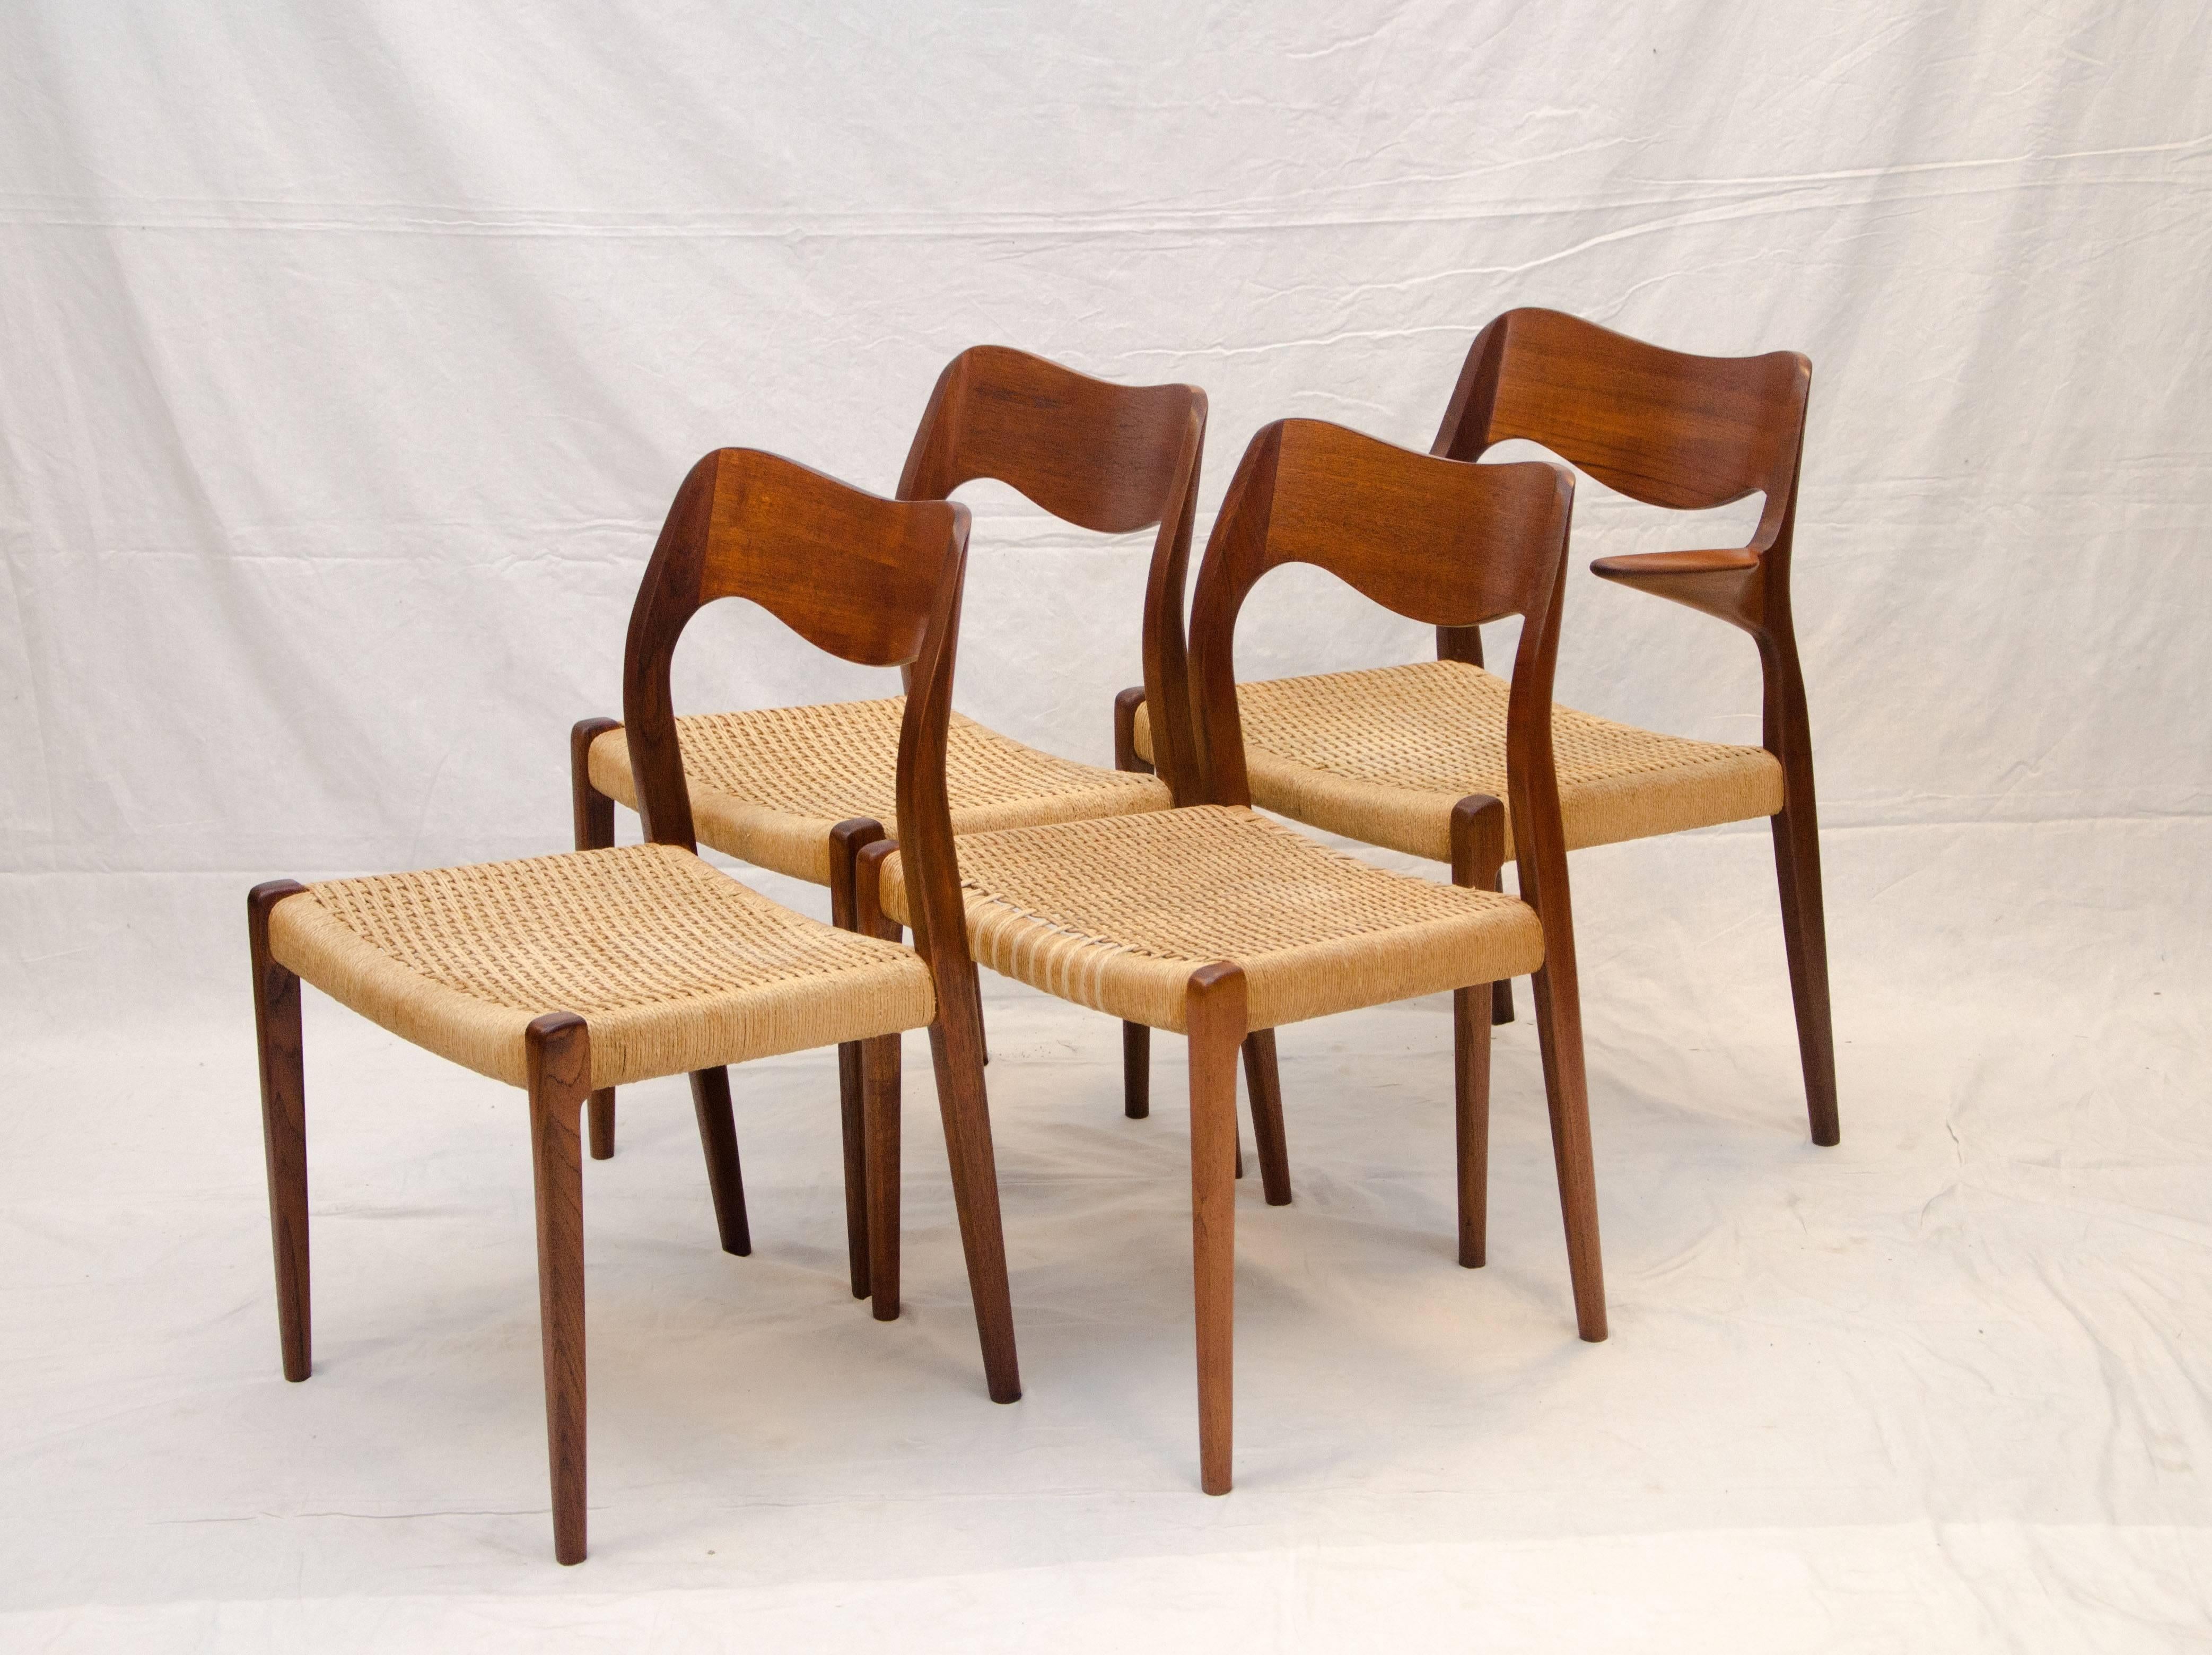  Set of four Danish teak Moller dining chairs. Side chairs are #71 and the arm chair is a #55 with a very natural stylish small arm design. The cord seats are original with a partial reweave on one side chair. One more side chair (also partial